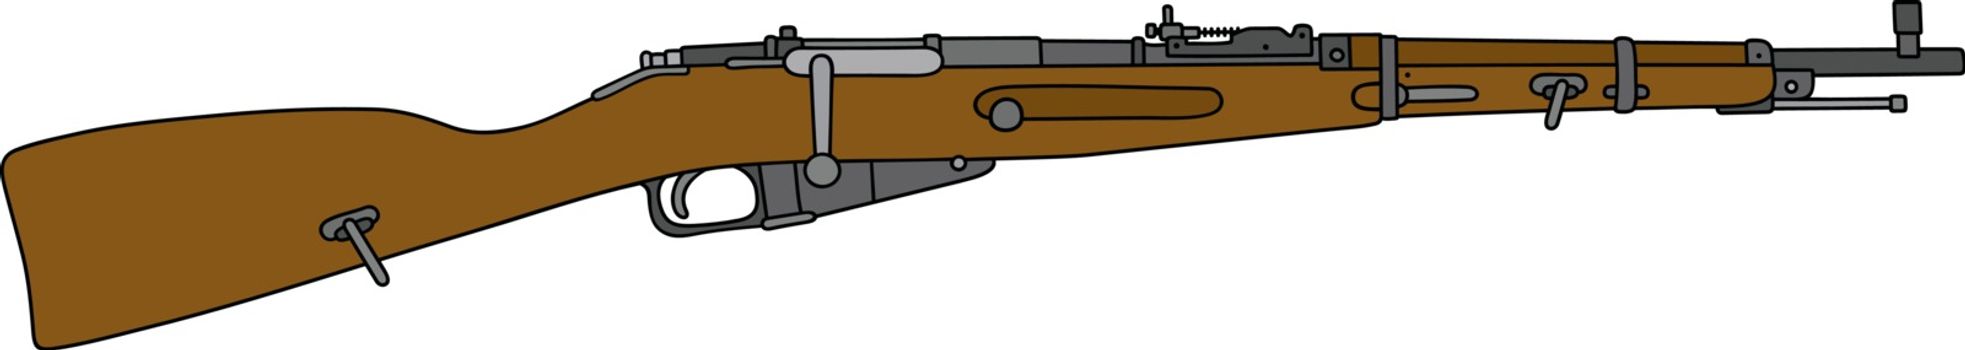 Hand drawing of an old short military rifle